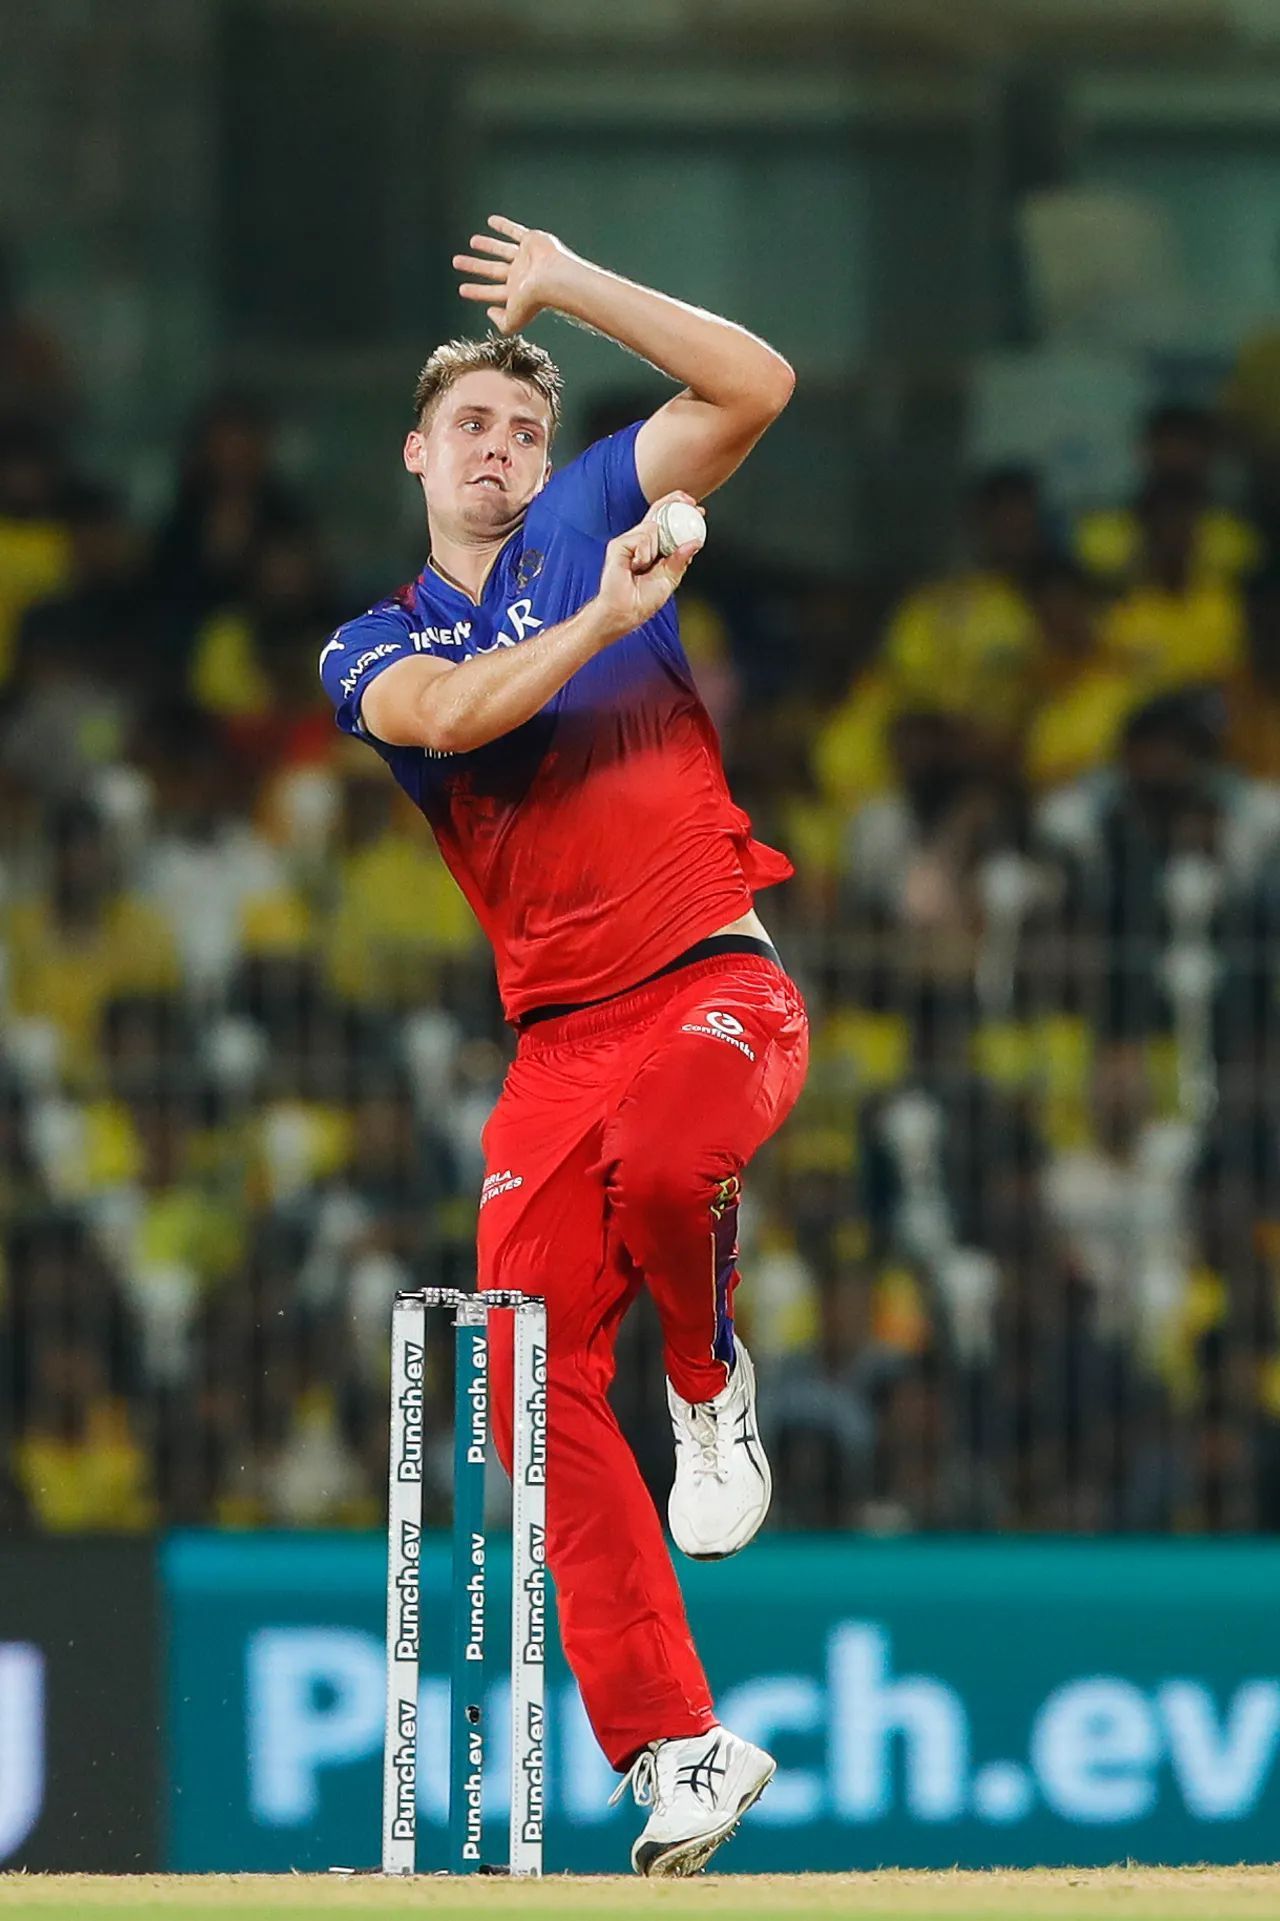 Cameron Green in action (Credits: IPL)